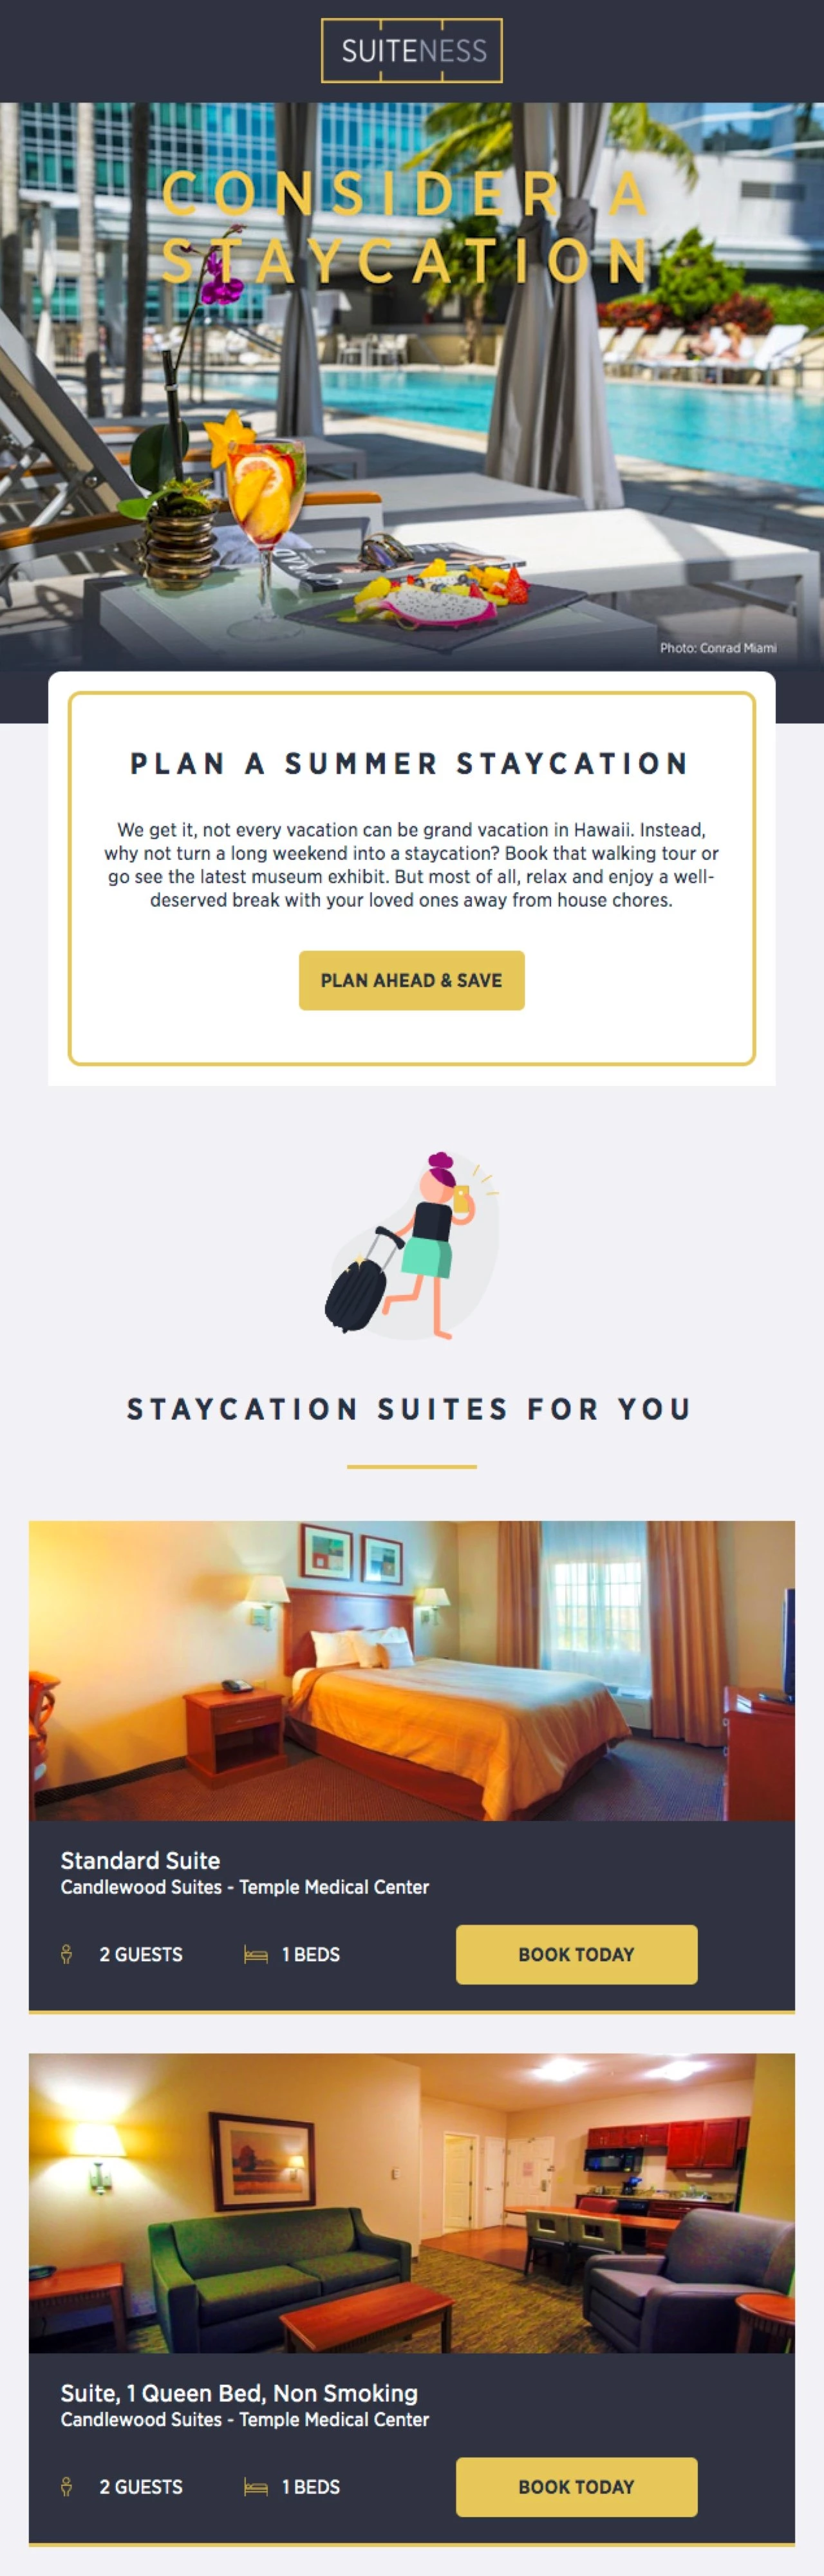 Suiteness hotel newsletter example